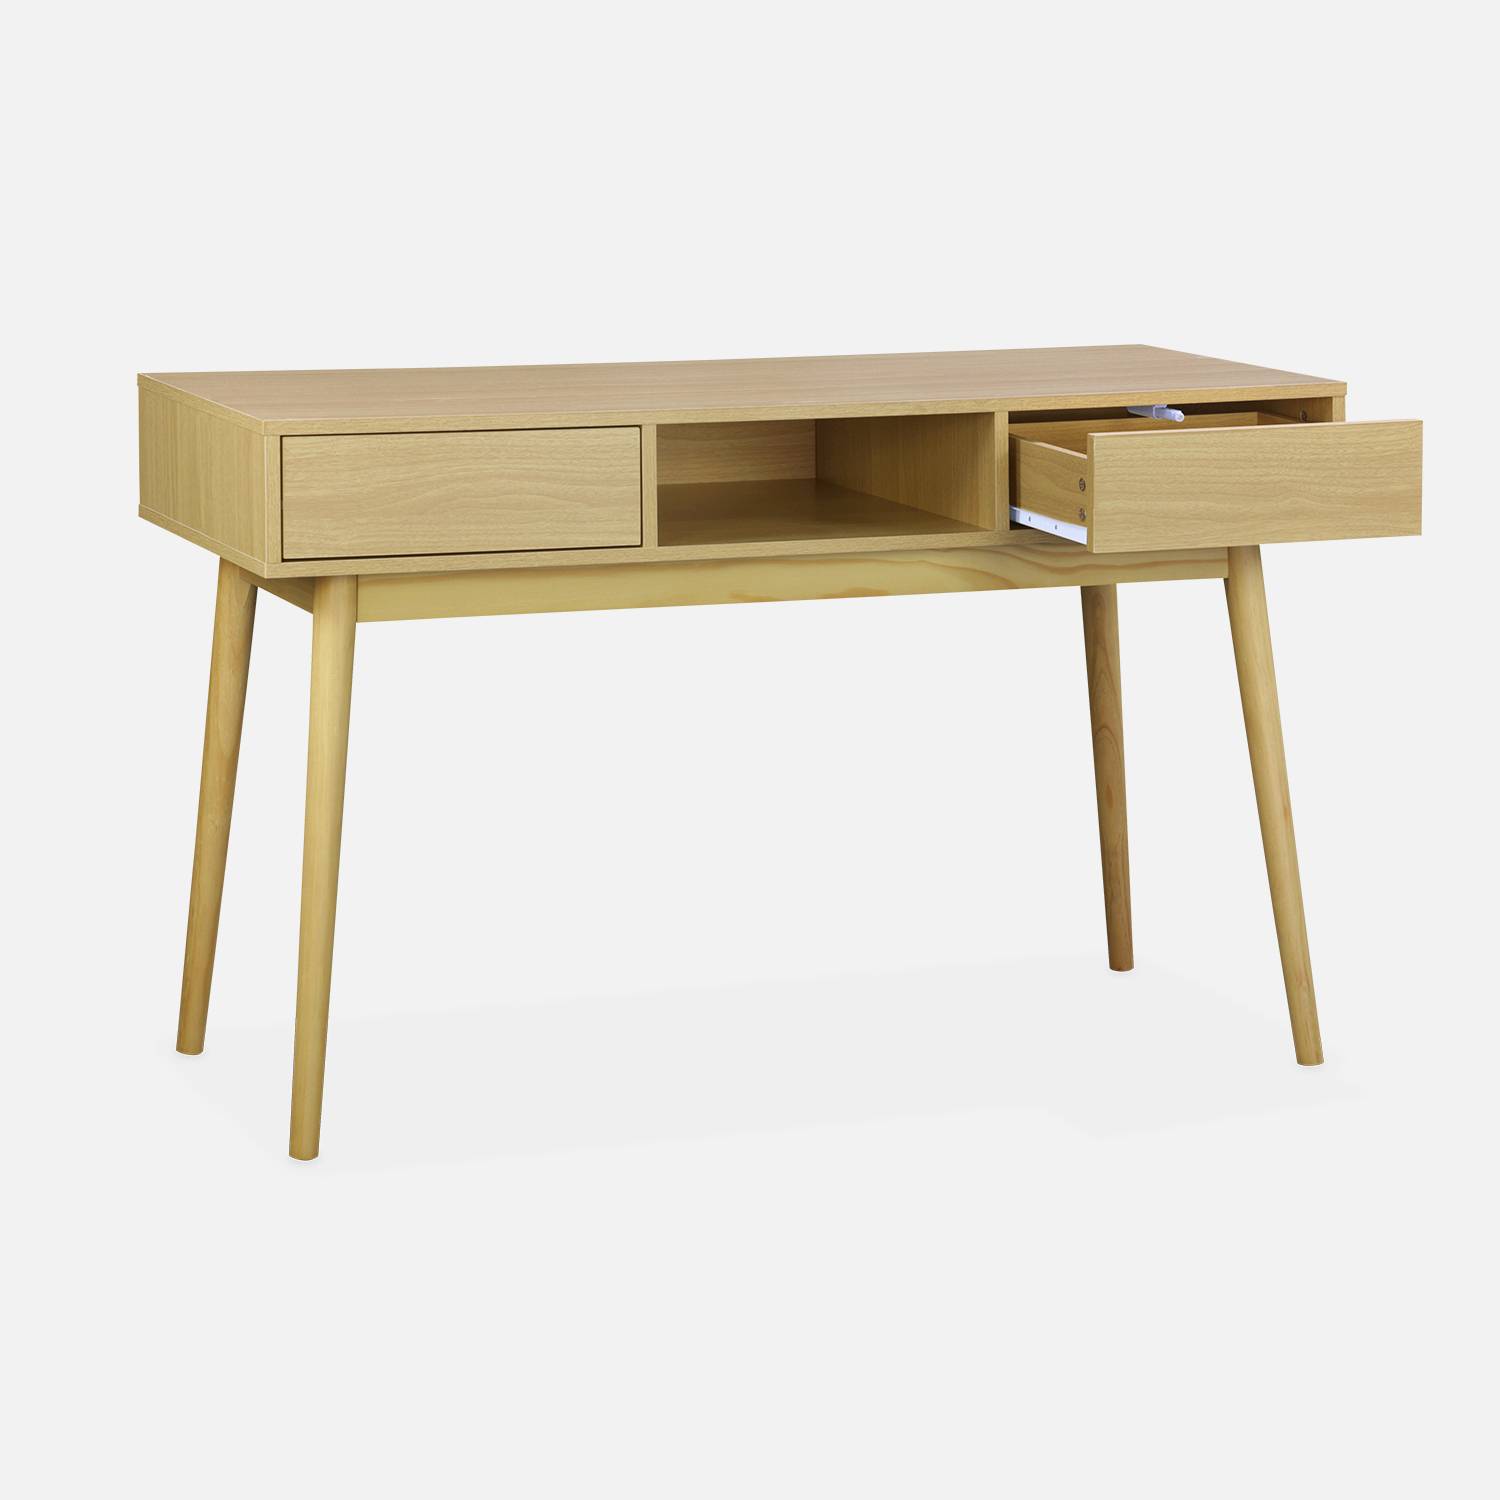 Wood-effect console table with two drawers and one storage nook, 120x48x75cm - Mika - Natural Wood colour Photo3